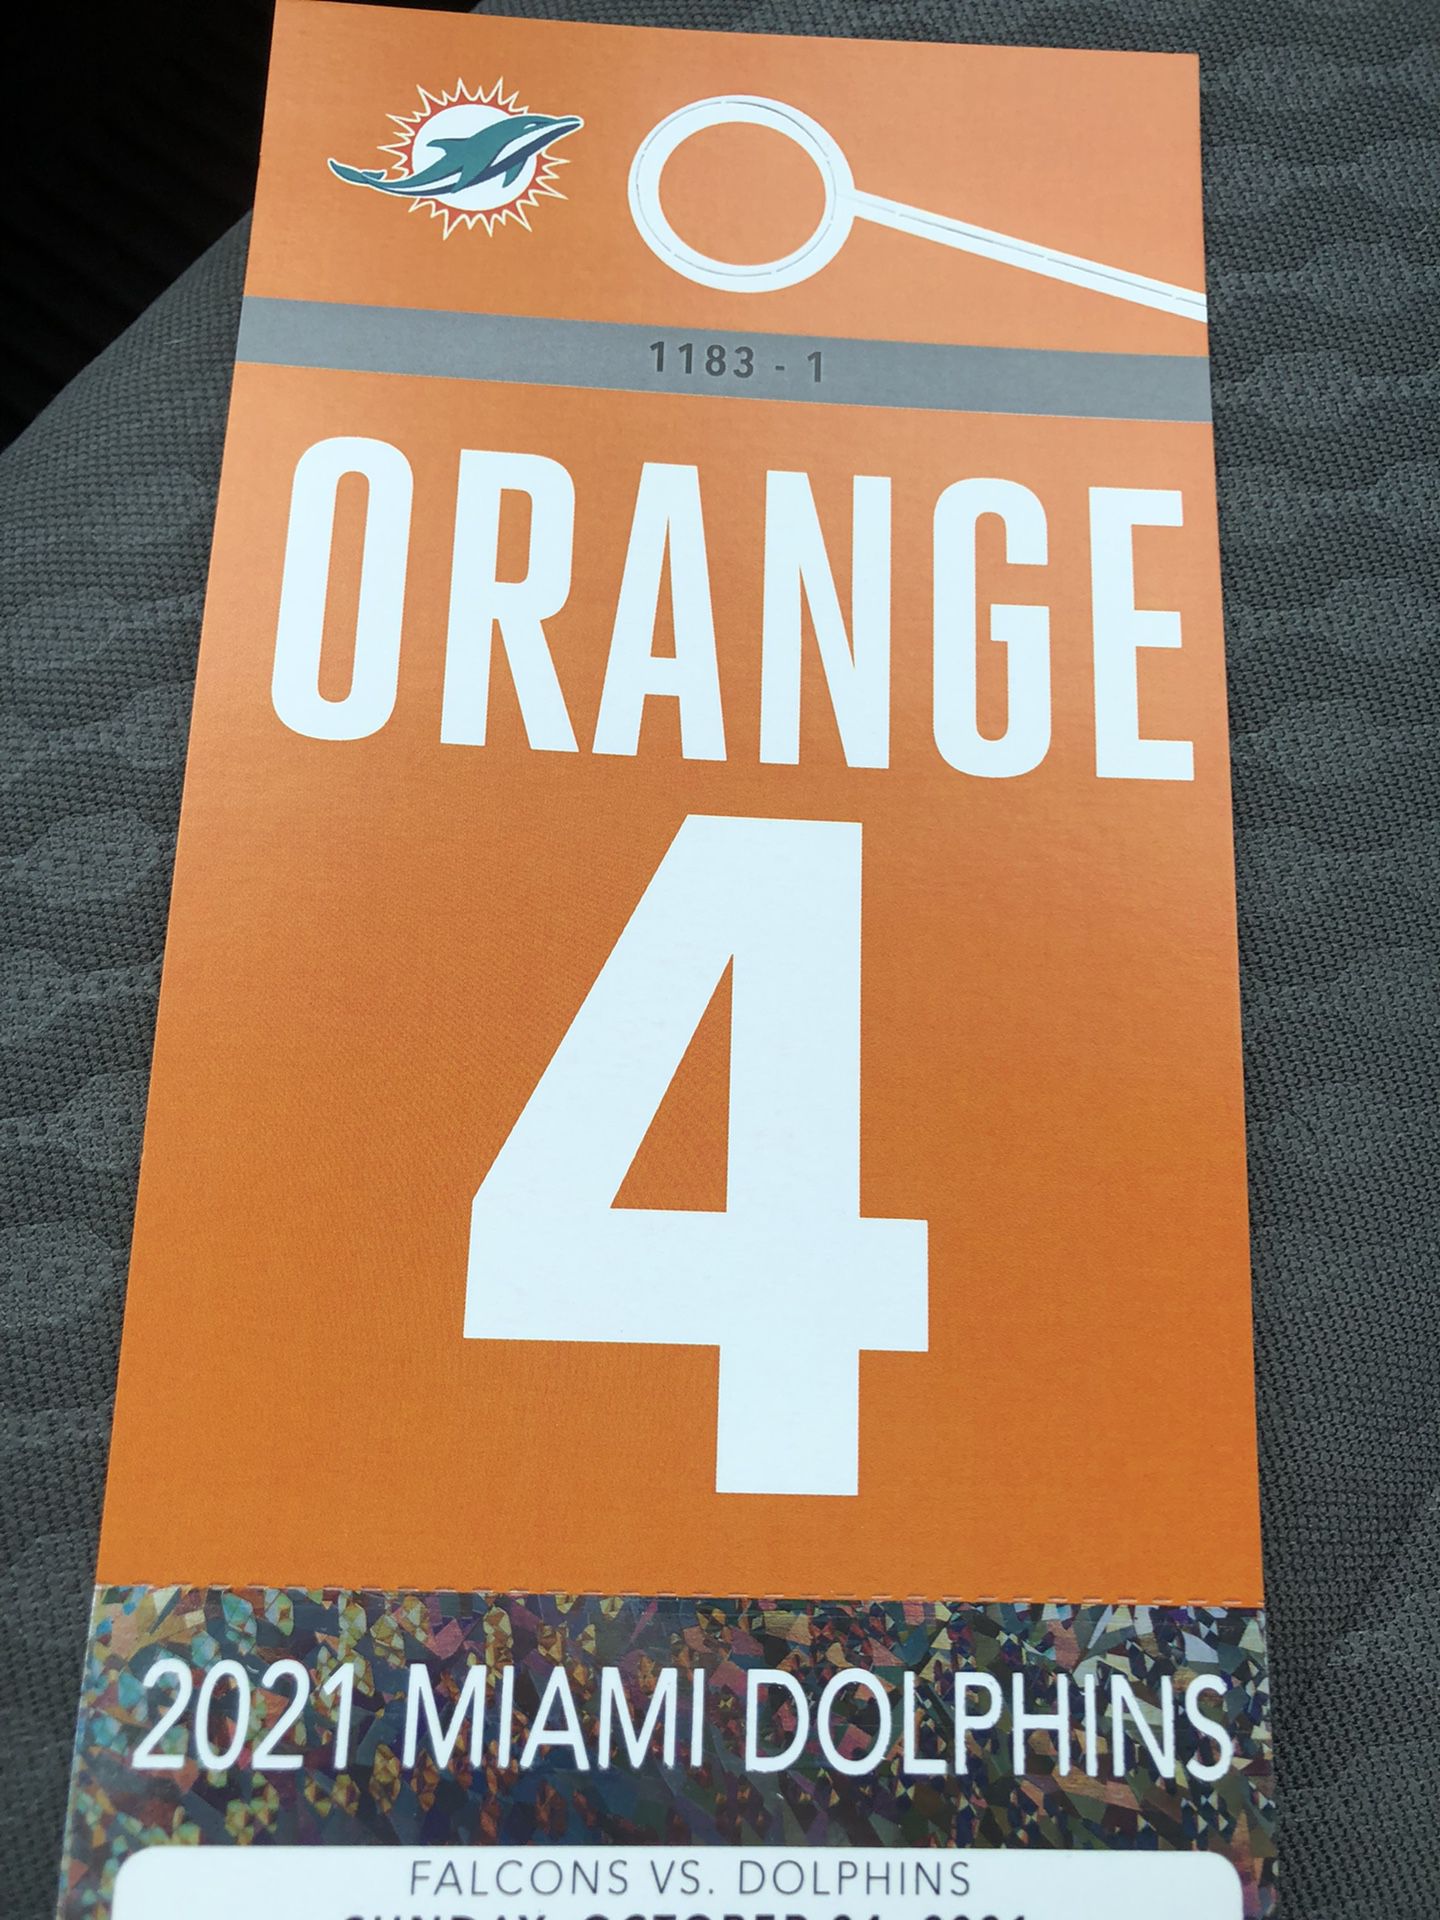 Dolphins Vs Falcons Parking Pass 